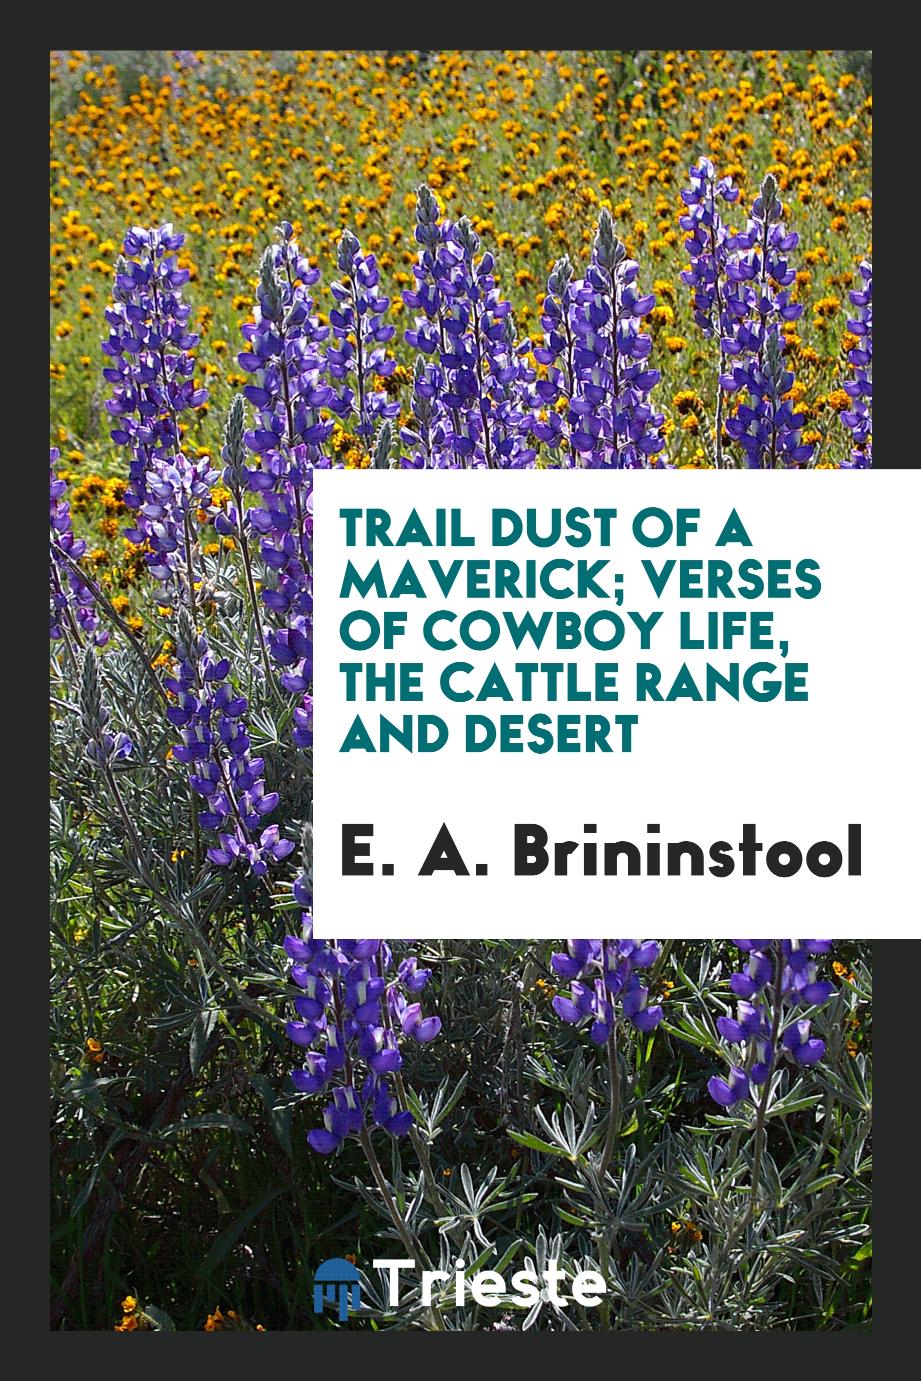 Trail dust of a maverick; verses of cowboy life, the cattle range and desert